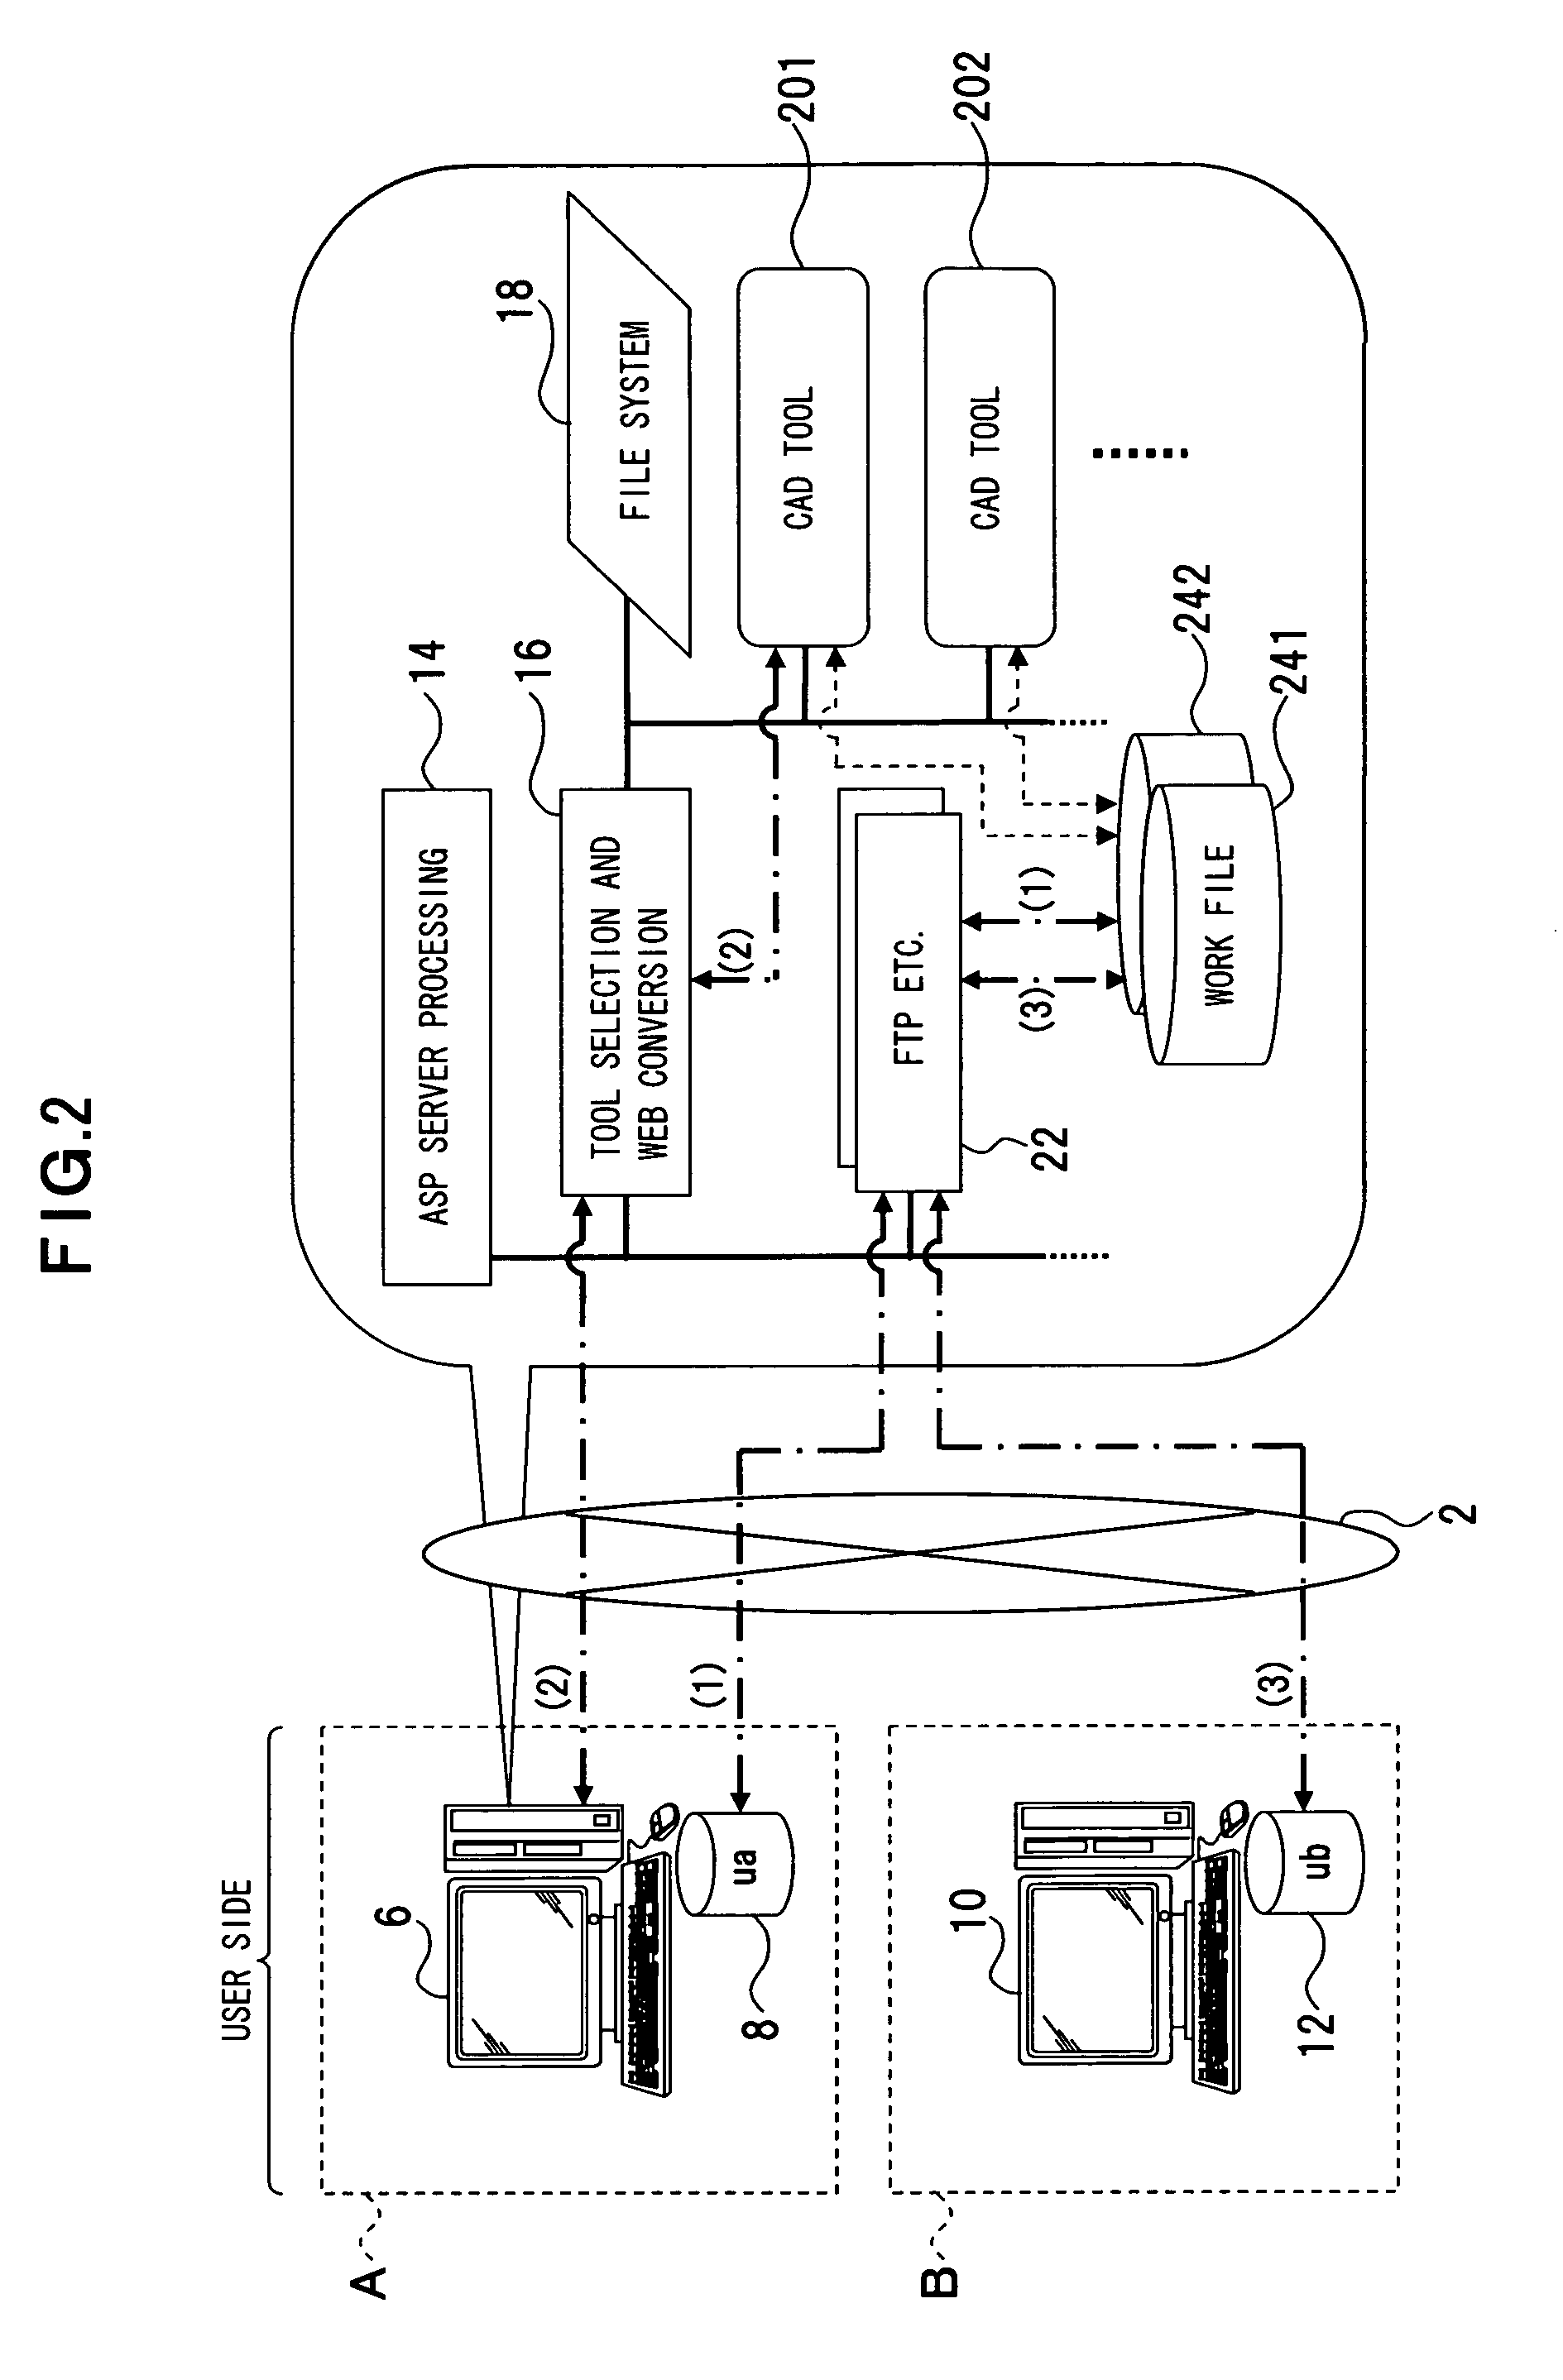 High-speed information processing by coordination of information processing resources apparatus, including method, and computer-readable recording medium thereof